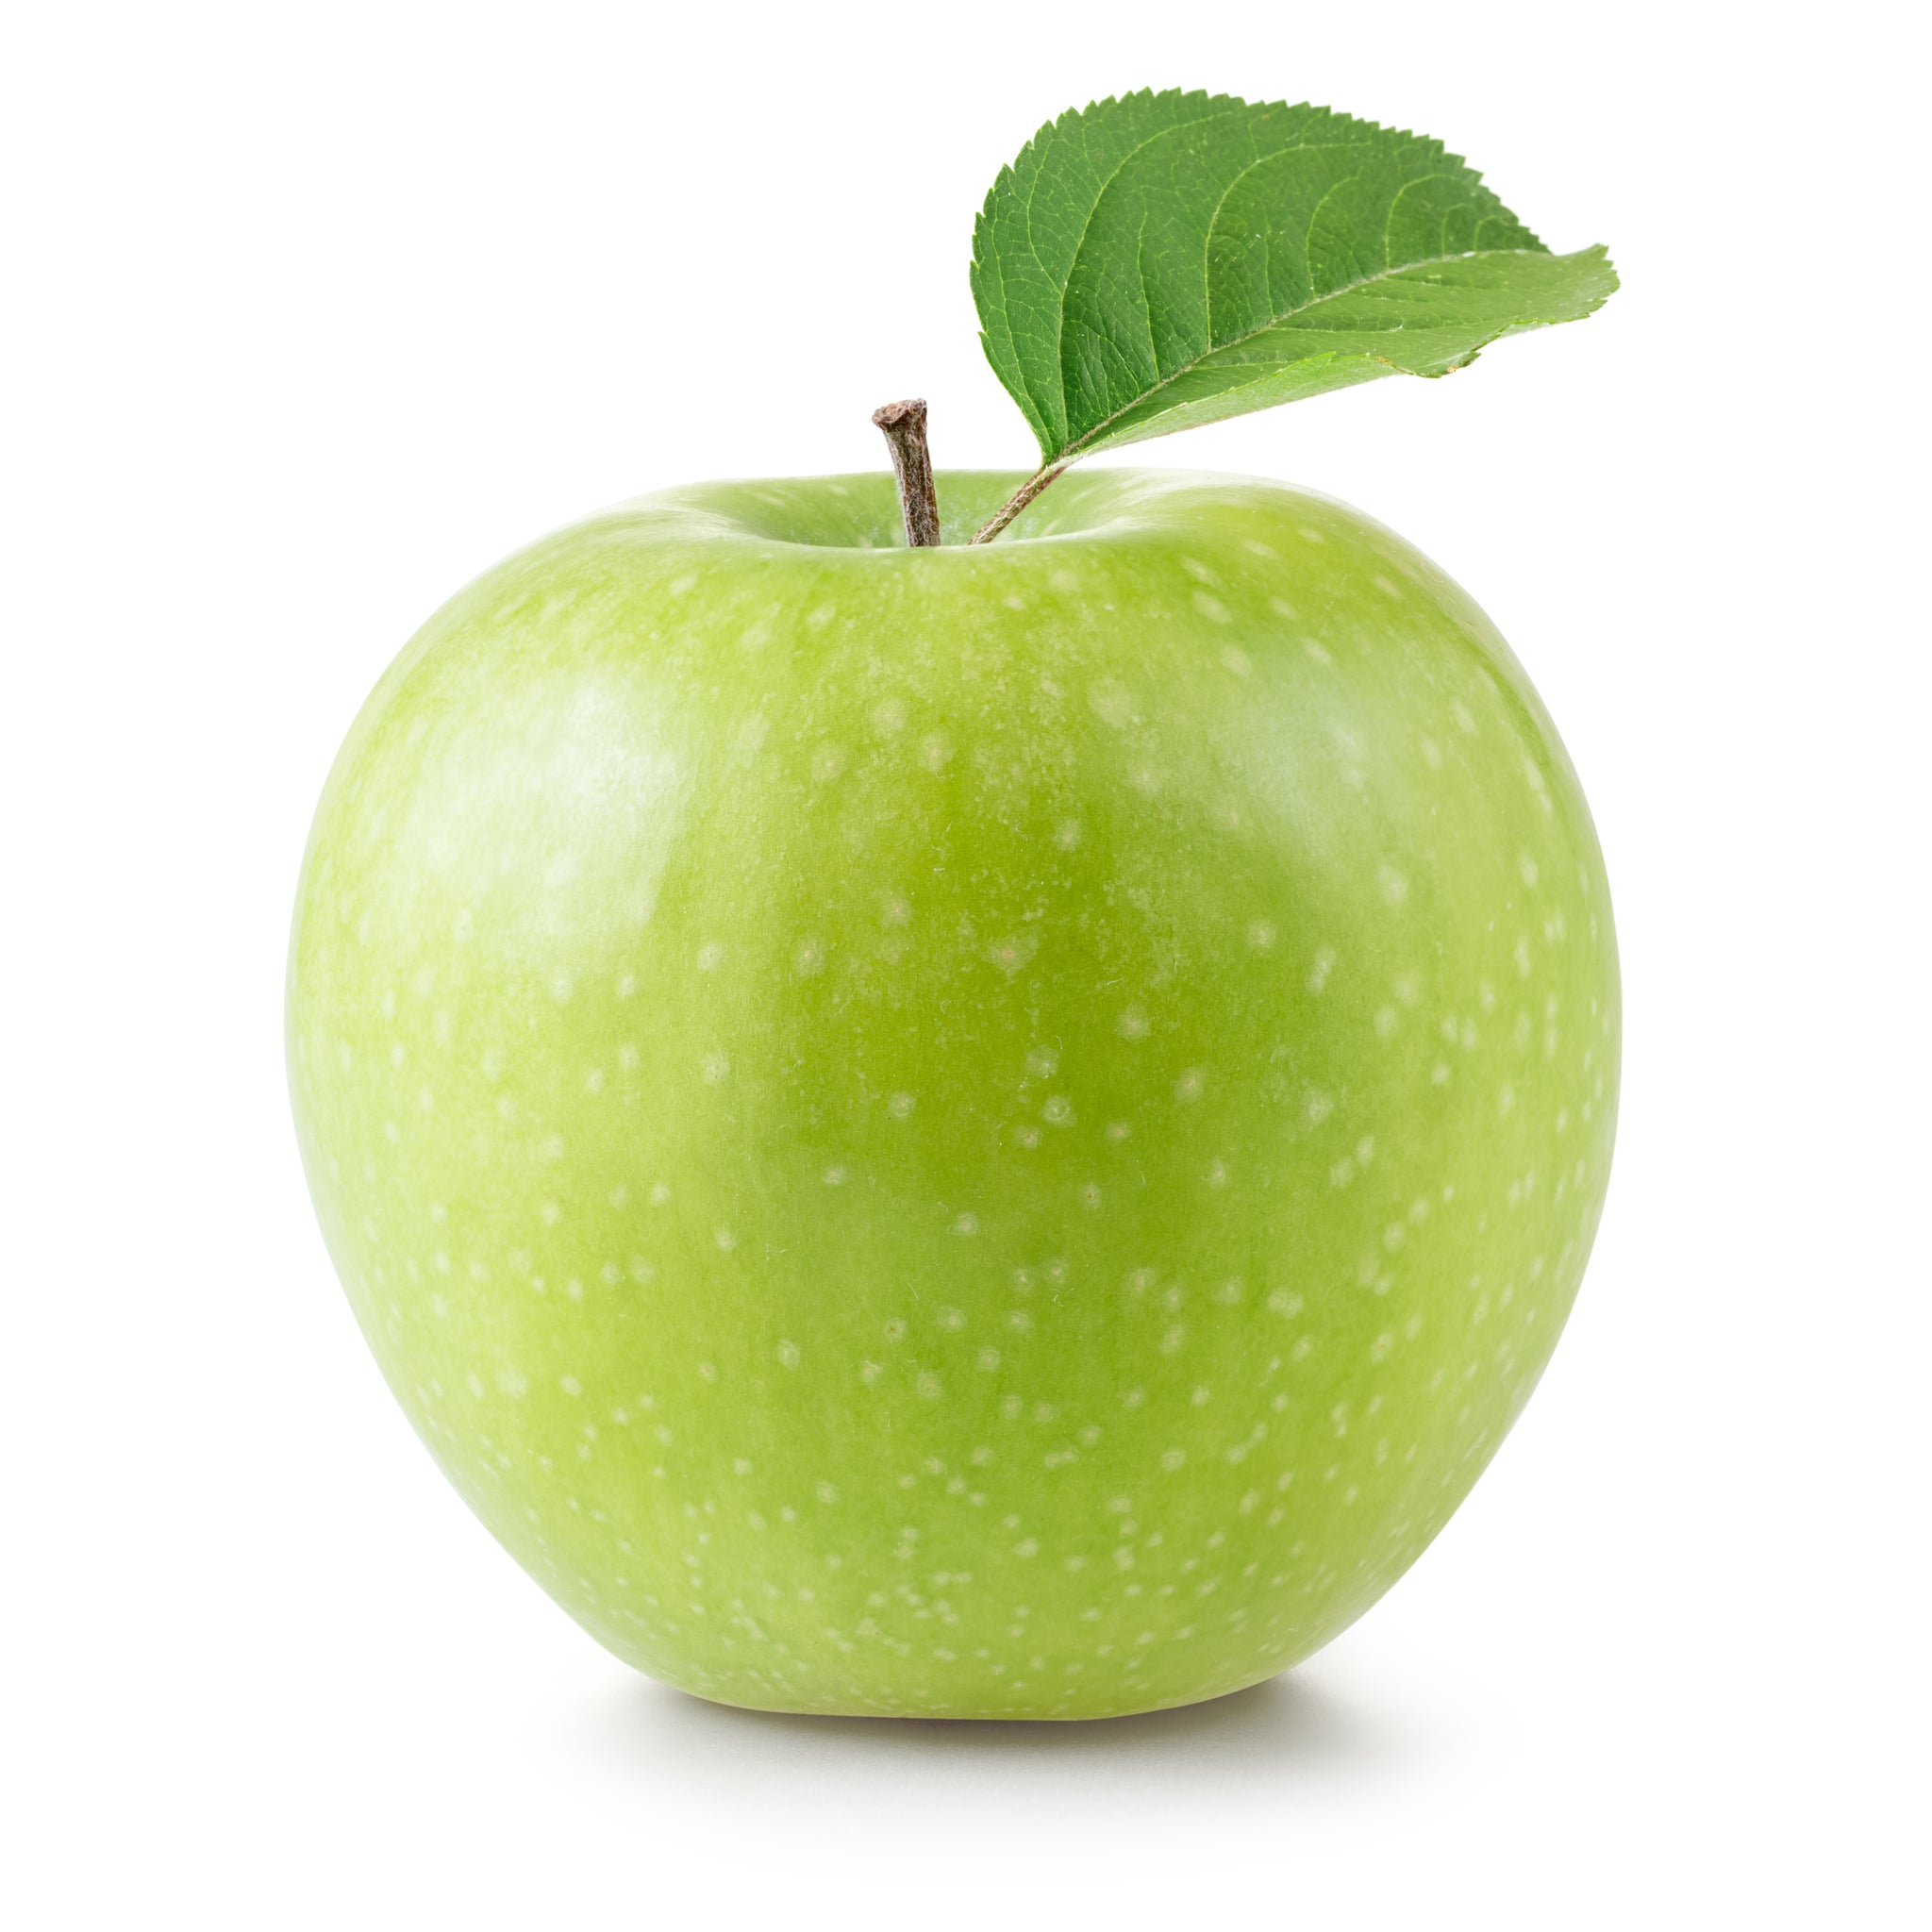 gre>Apples - Granny Smith - Large -1 Apple